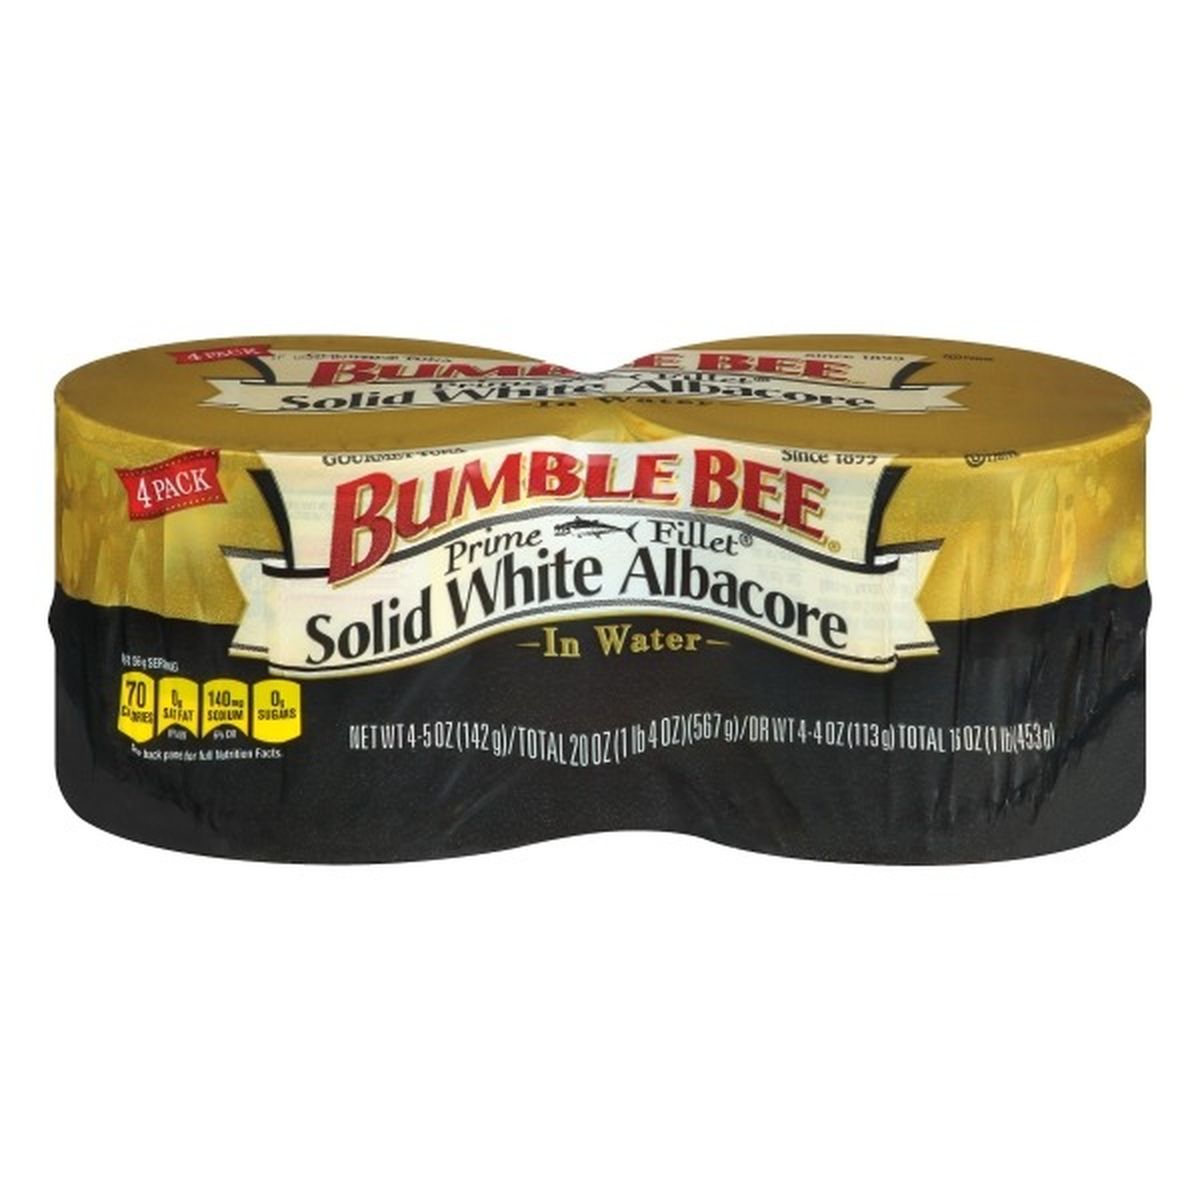 Calories in Bumble Bee Prime Fillet Tuna in Water, Albacore, Solid White, 4 Pack